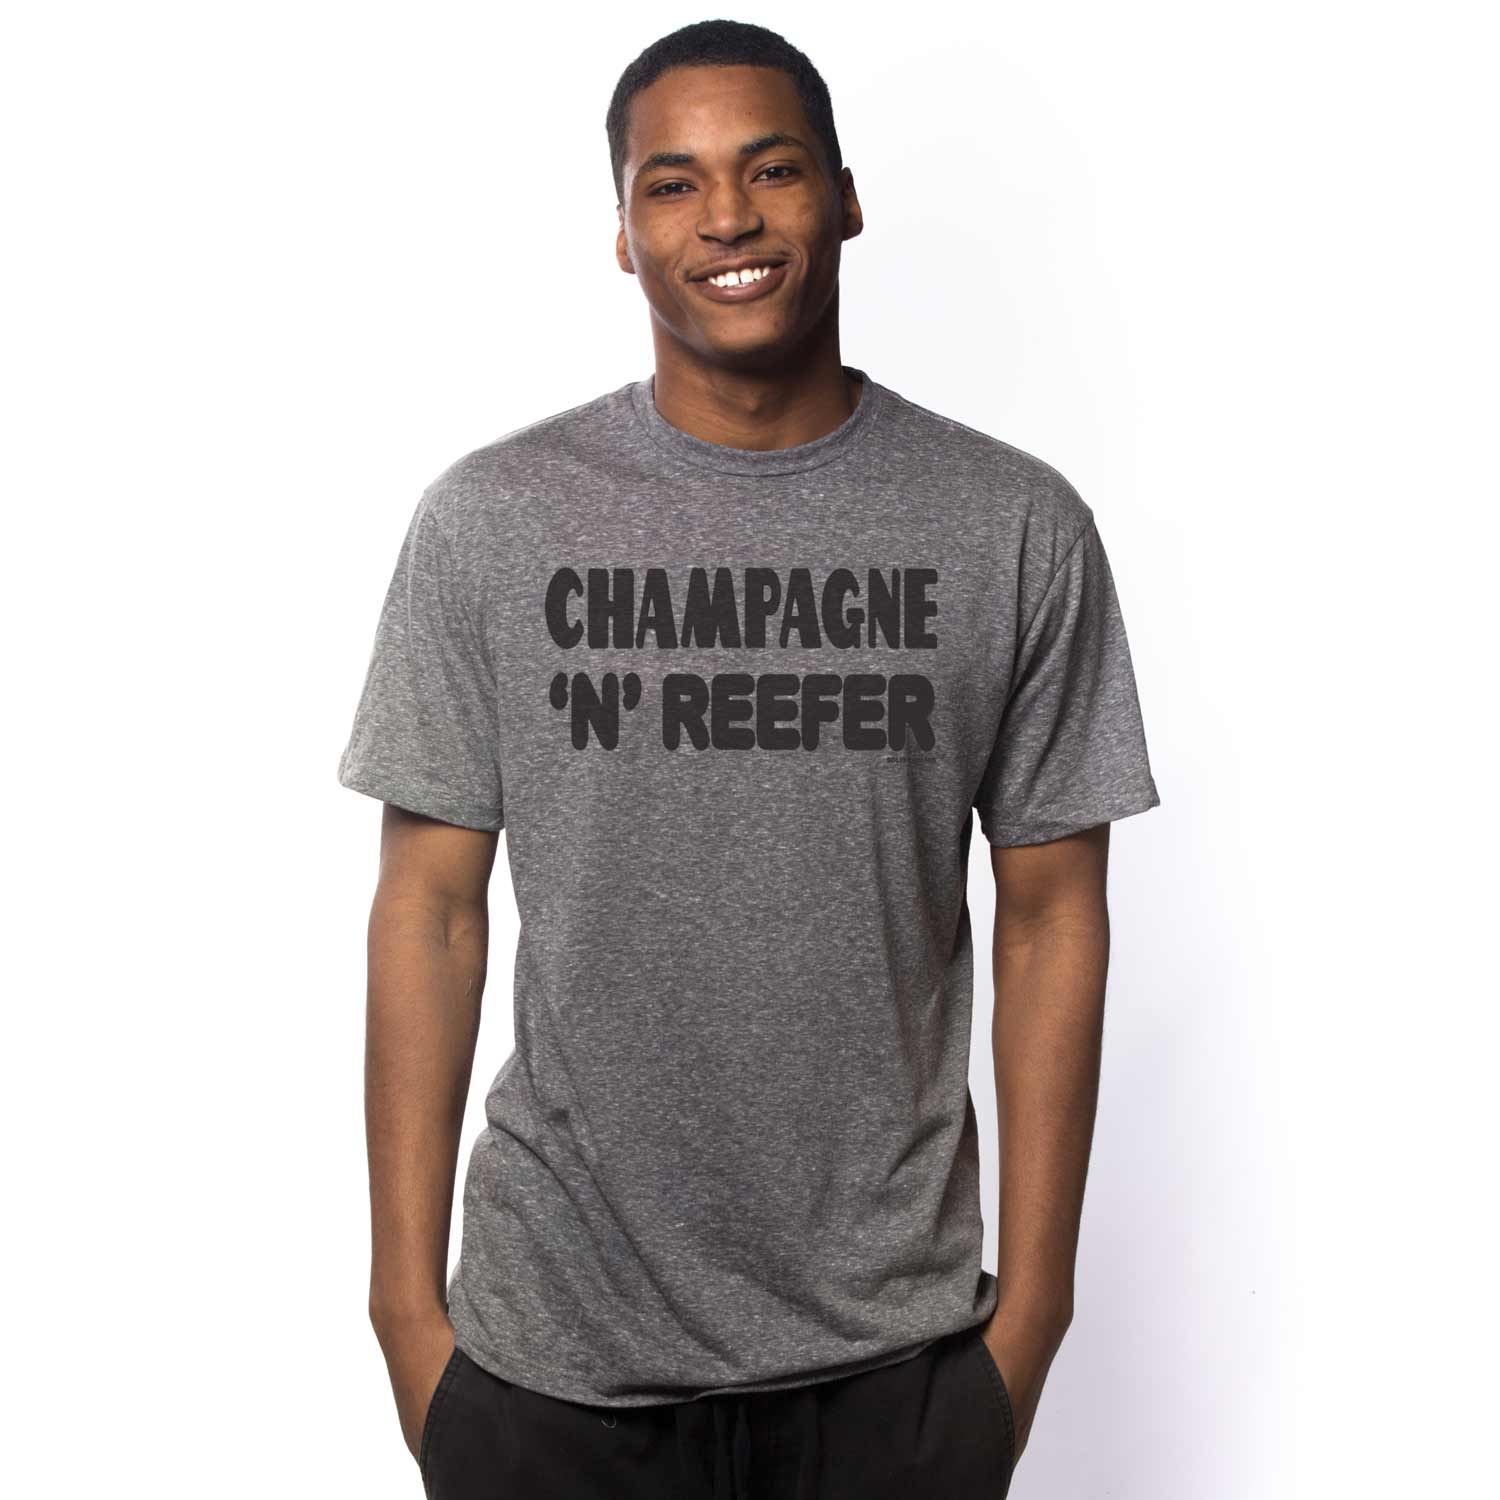 Men's Champagne & Reefer Vintage Inspired T-shirt | Retro Party Graphic Tee | Solid Threads